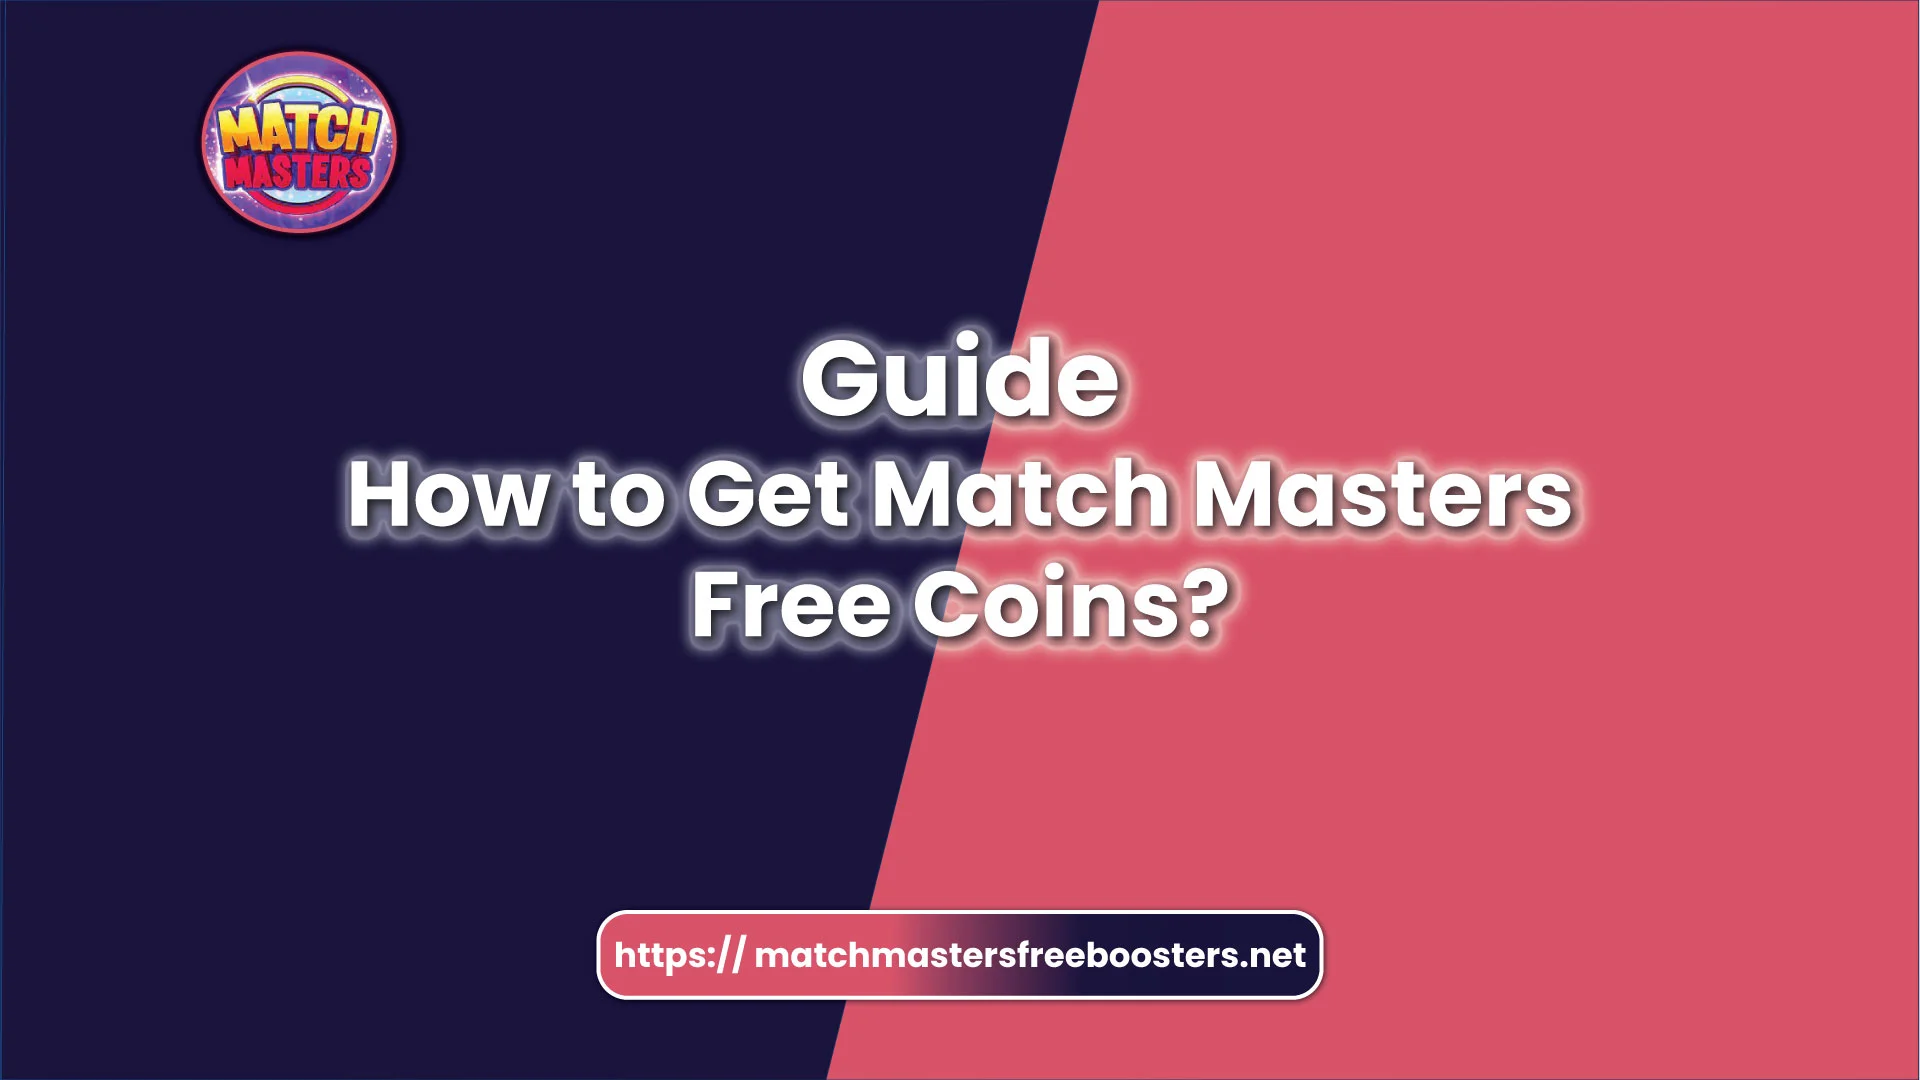 How to Get Match Masters Free Coins